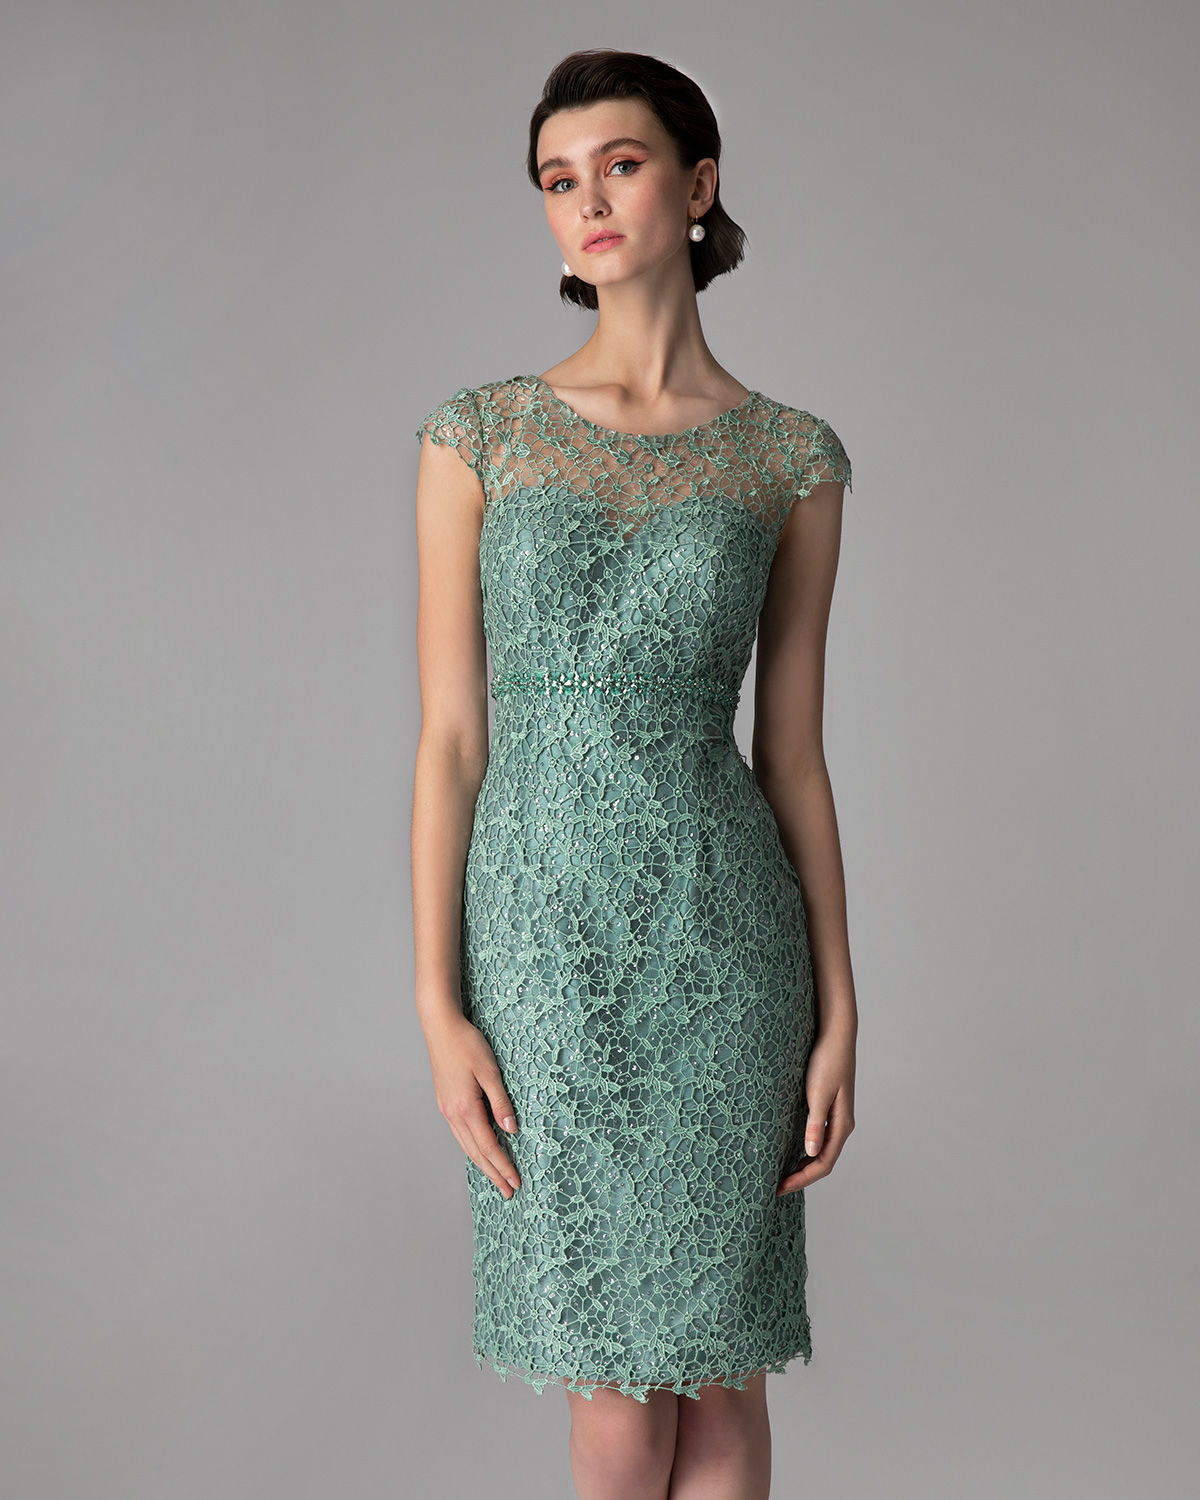 Classic Dresses / Short lace dress for mother of the bride  with beading around the waist